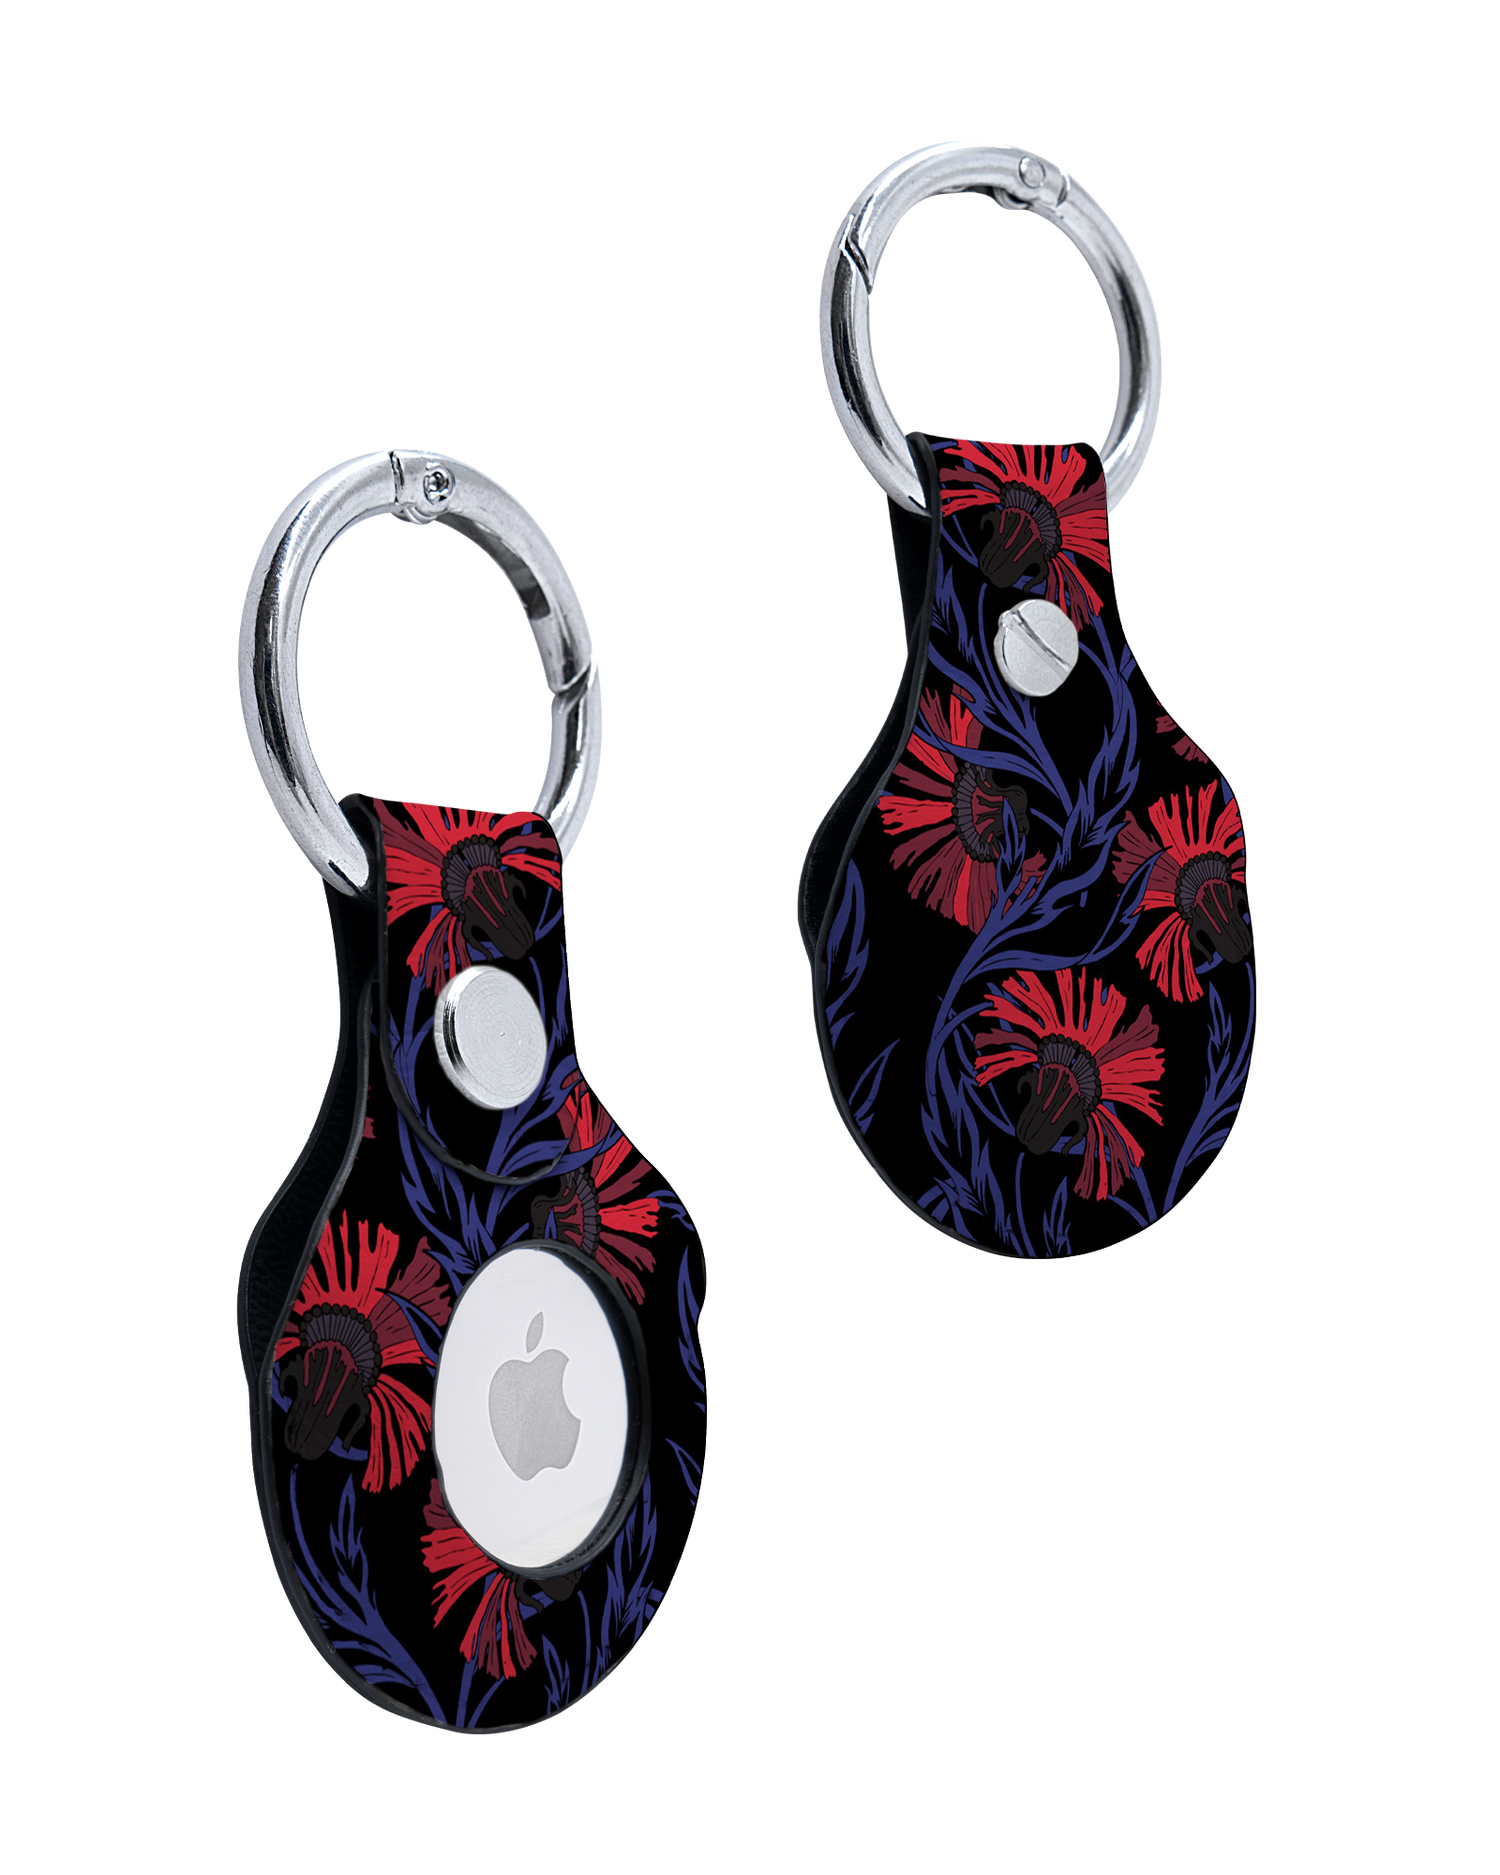 AirTag Holder with Midnight Floral Design: Front and Back